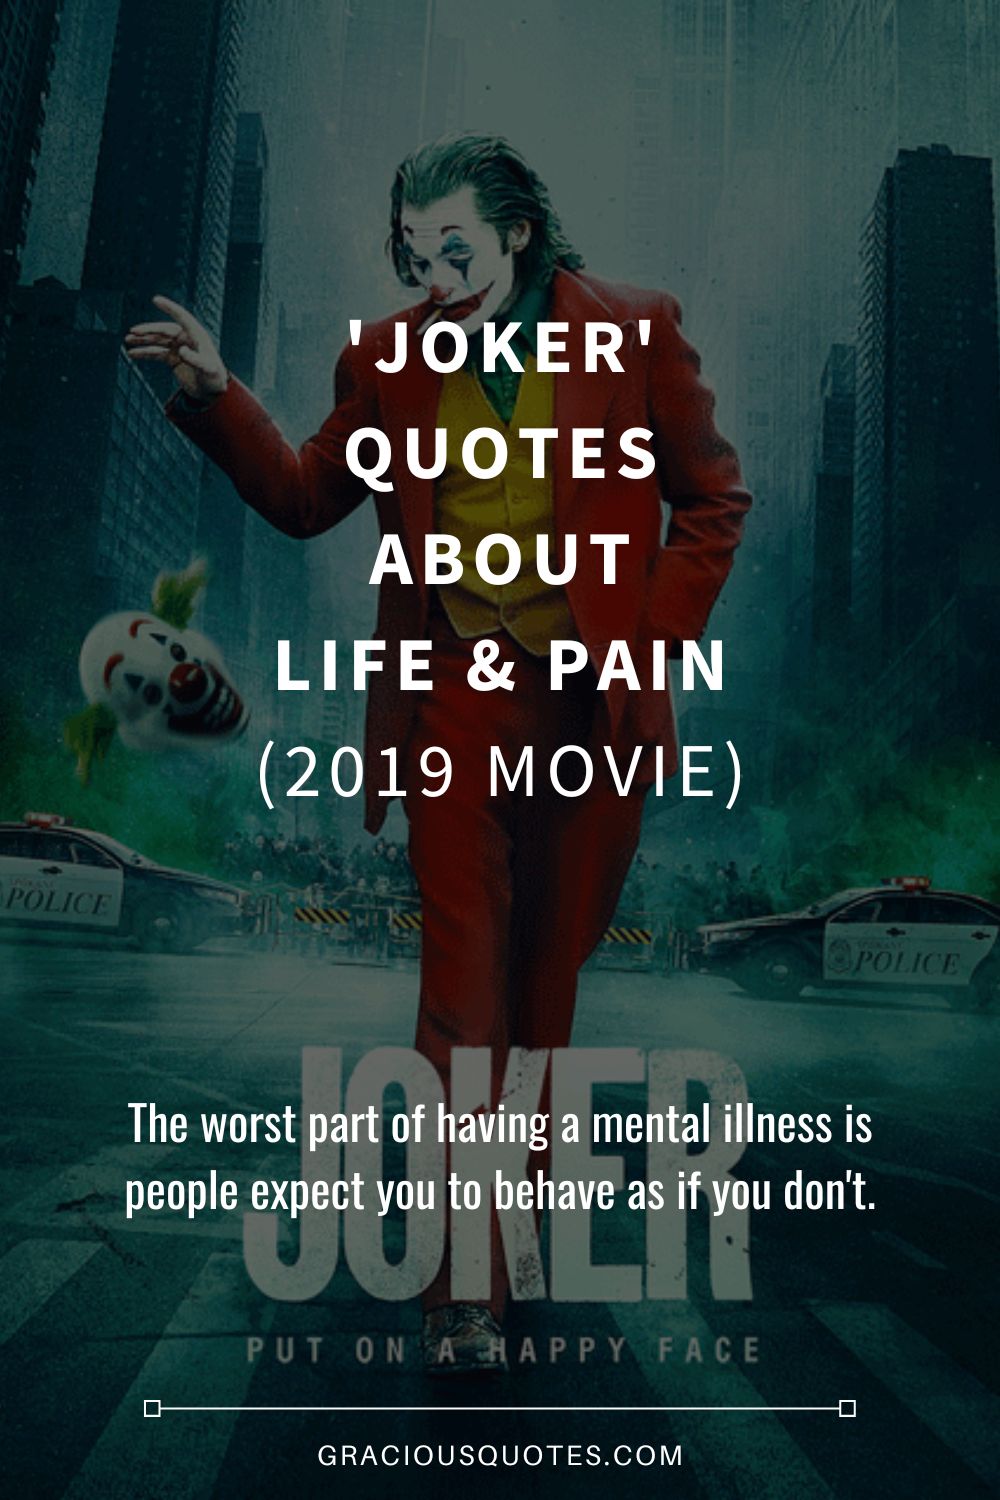 Top 49 'Joker' Quotes About Life & Pain (2019 MOVIE)